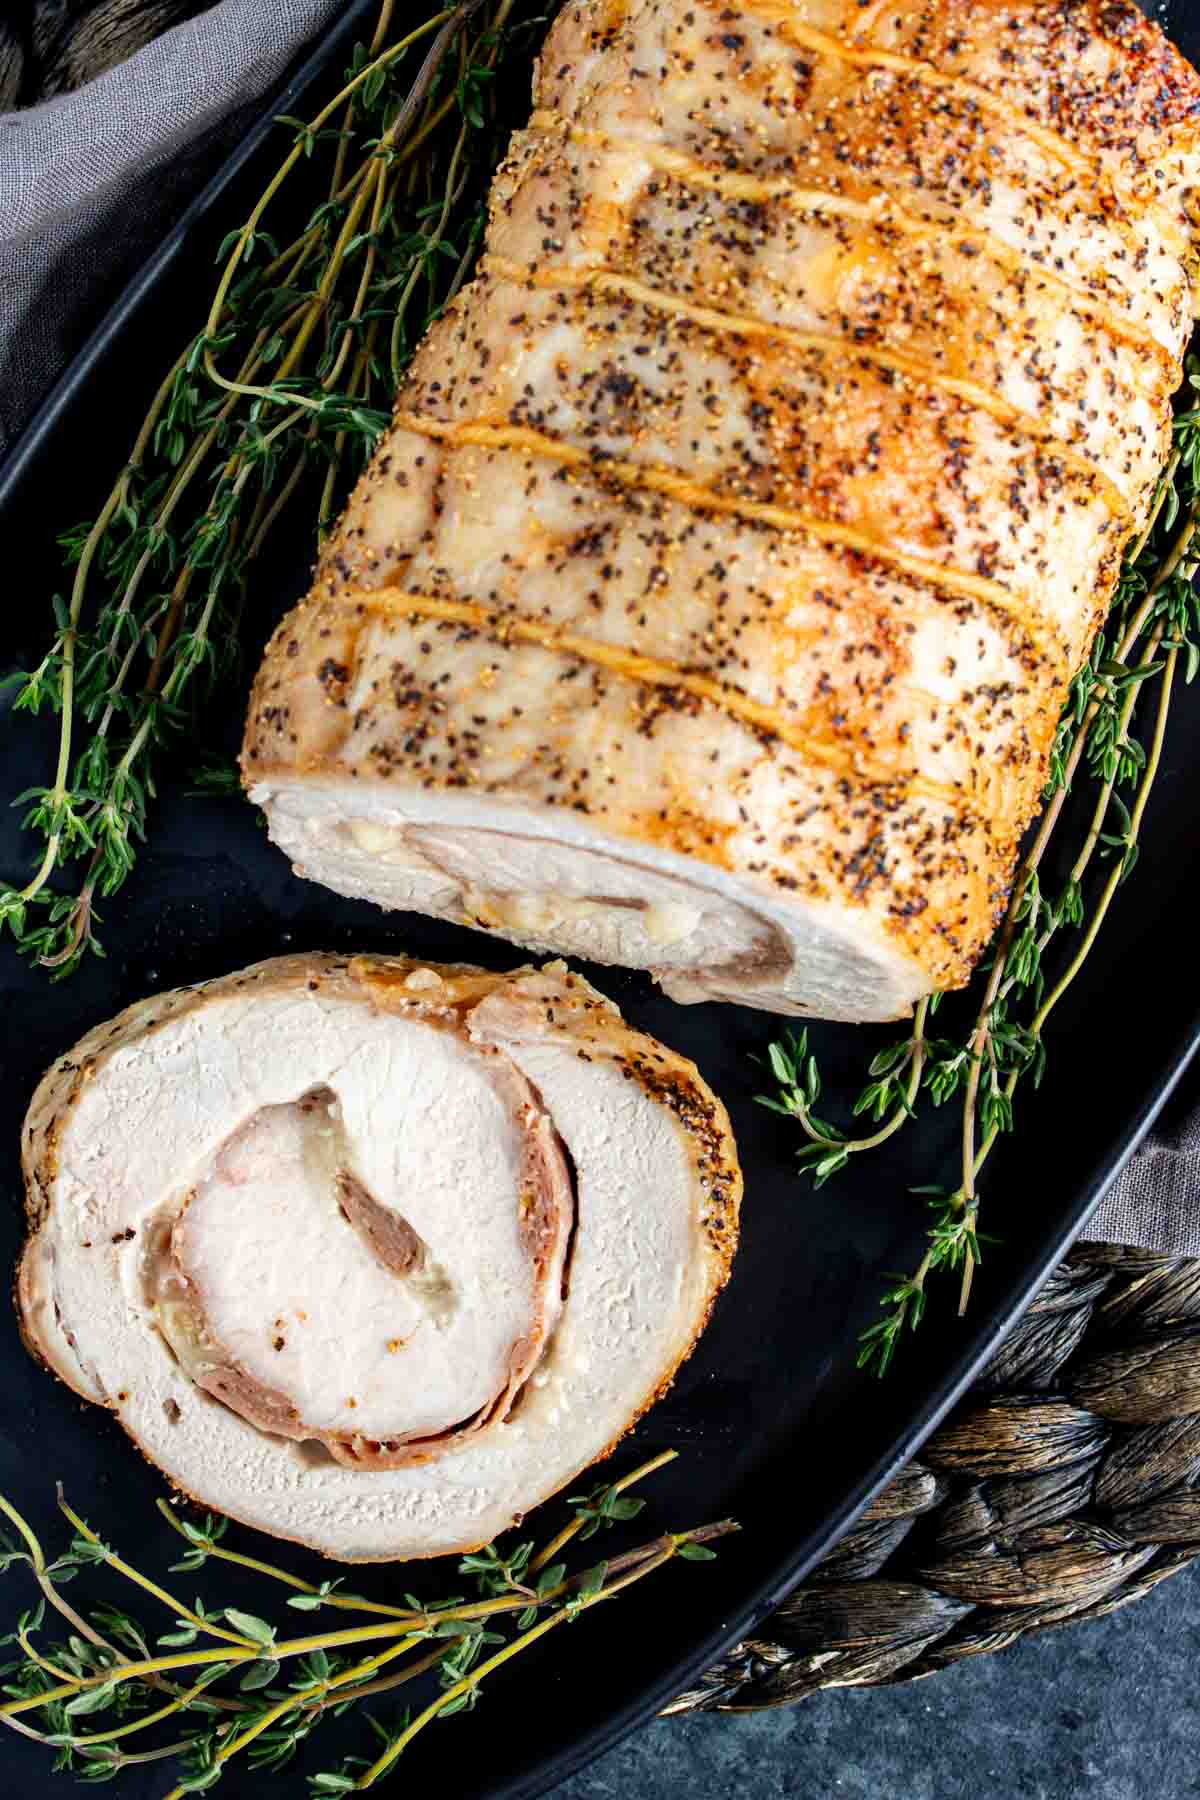 A Provolone and Prosciutto Stuffed Pork Loin on a black plate with thyme sprigs.